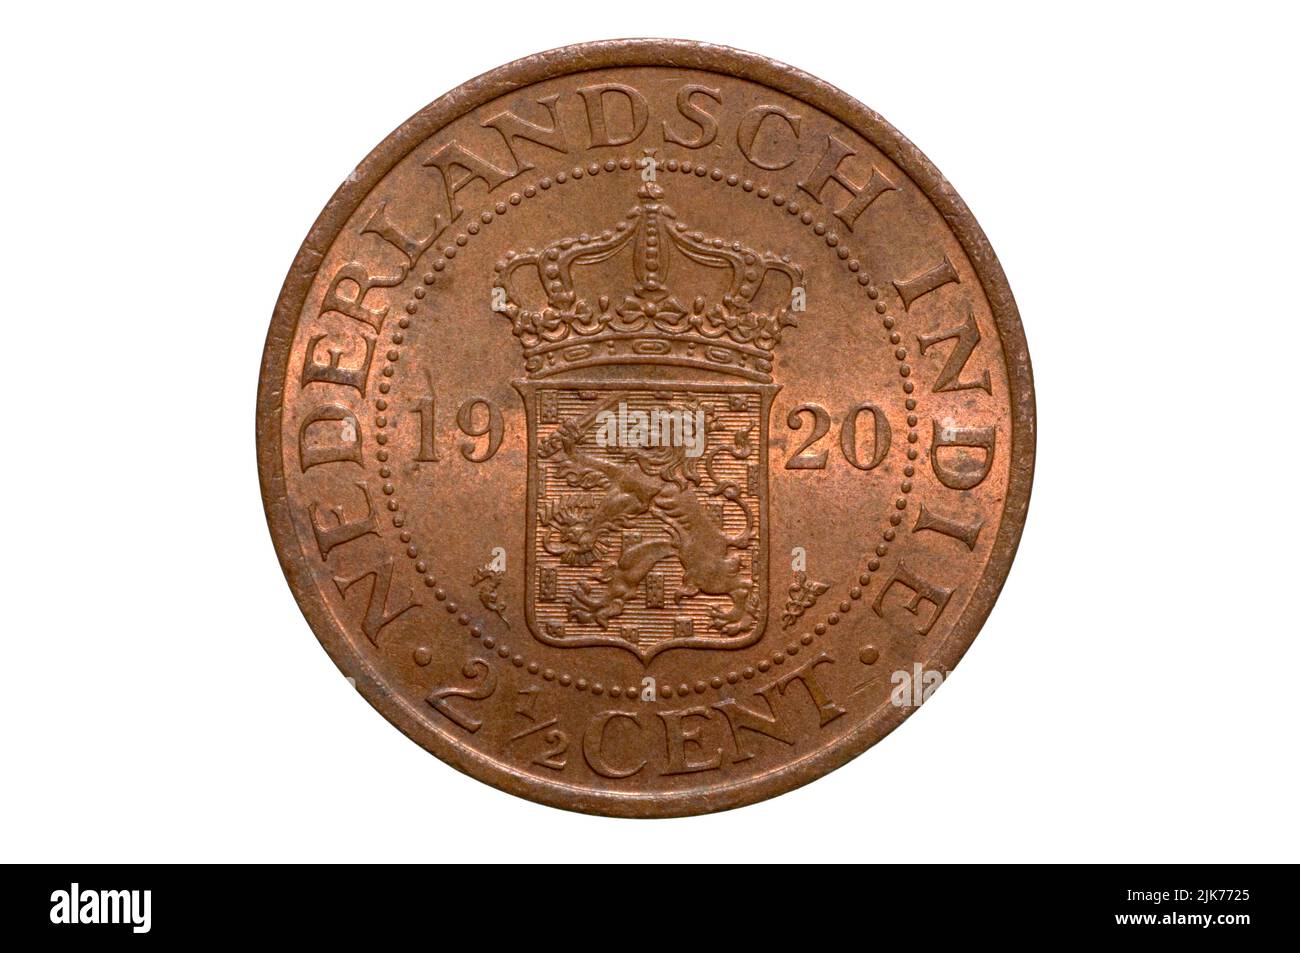 Netherlands East Indies 2-1/2 Cents 1920 Stock Photo